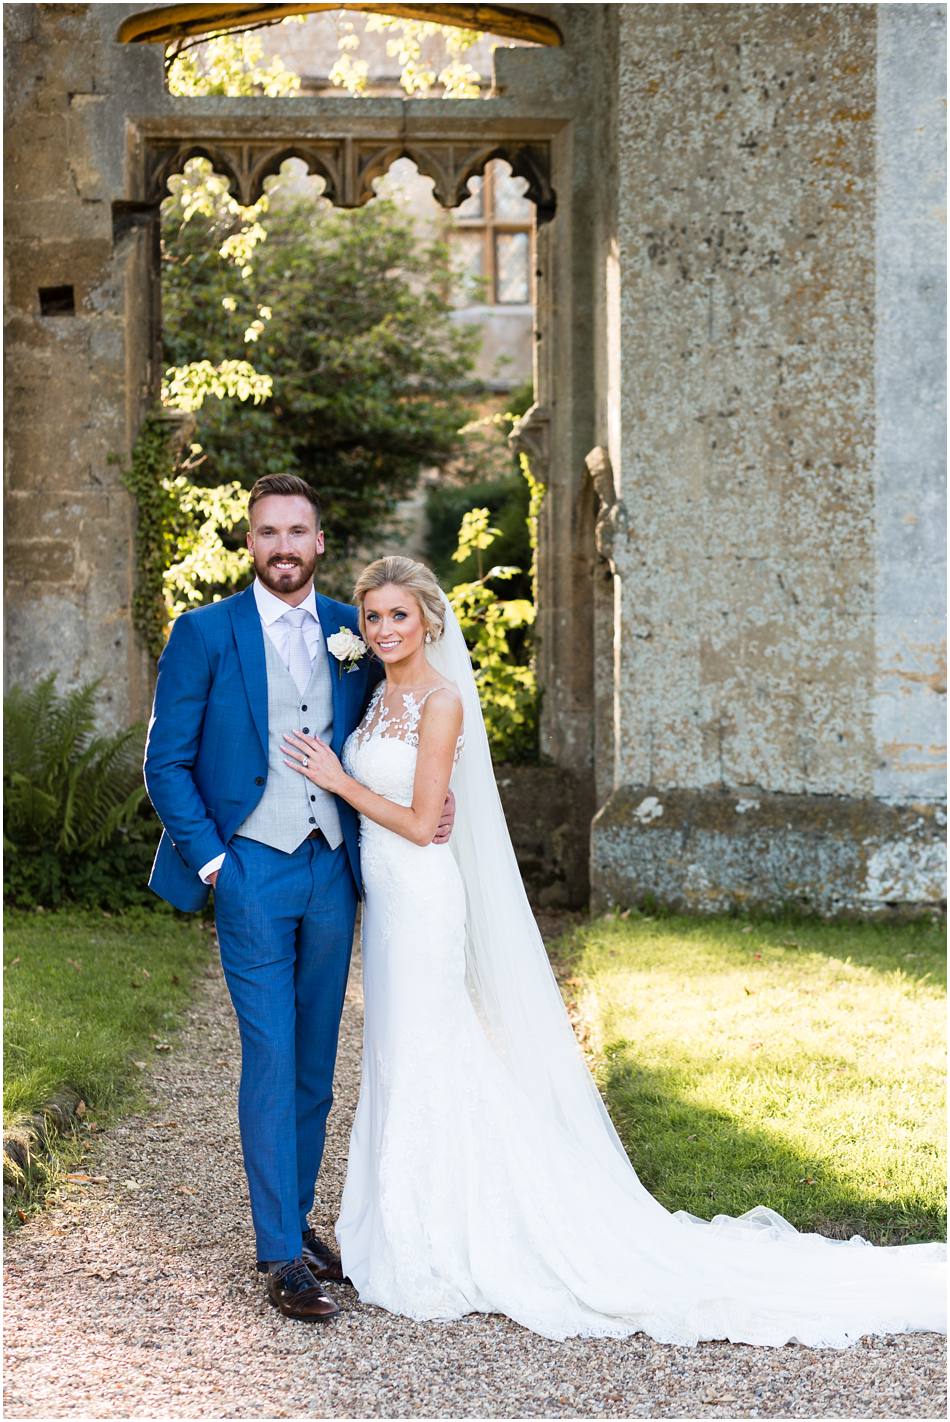 Bride and Groom wedding photo at Sudeley Castle